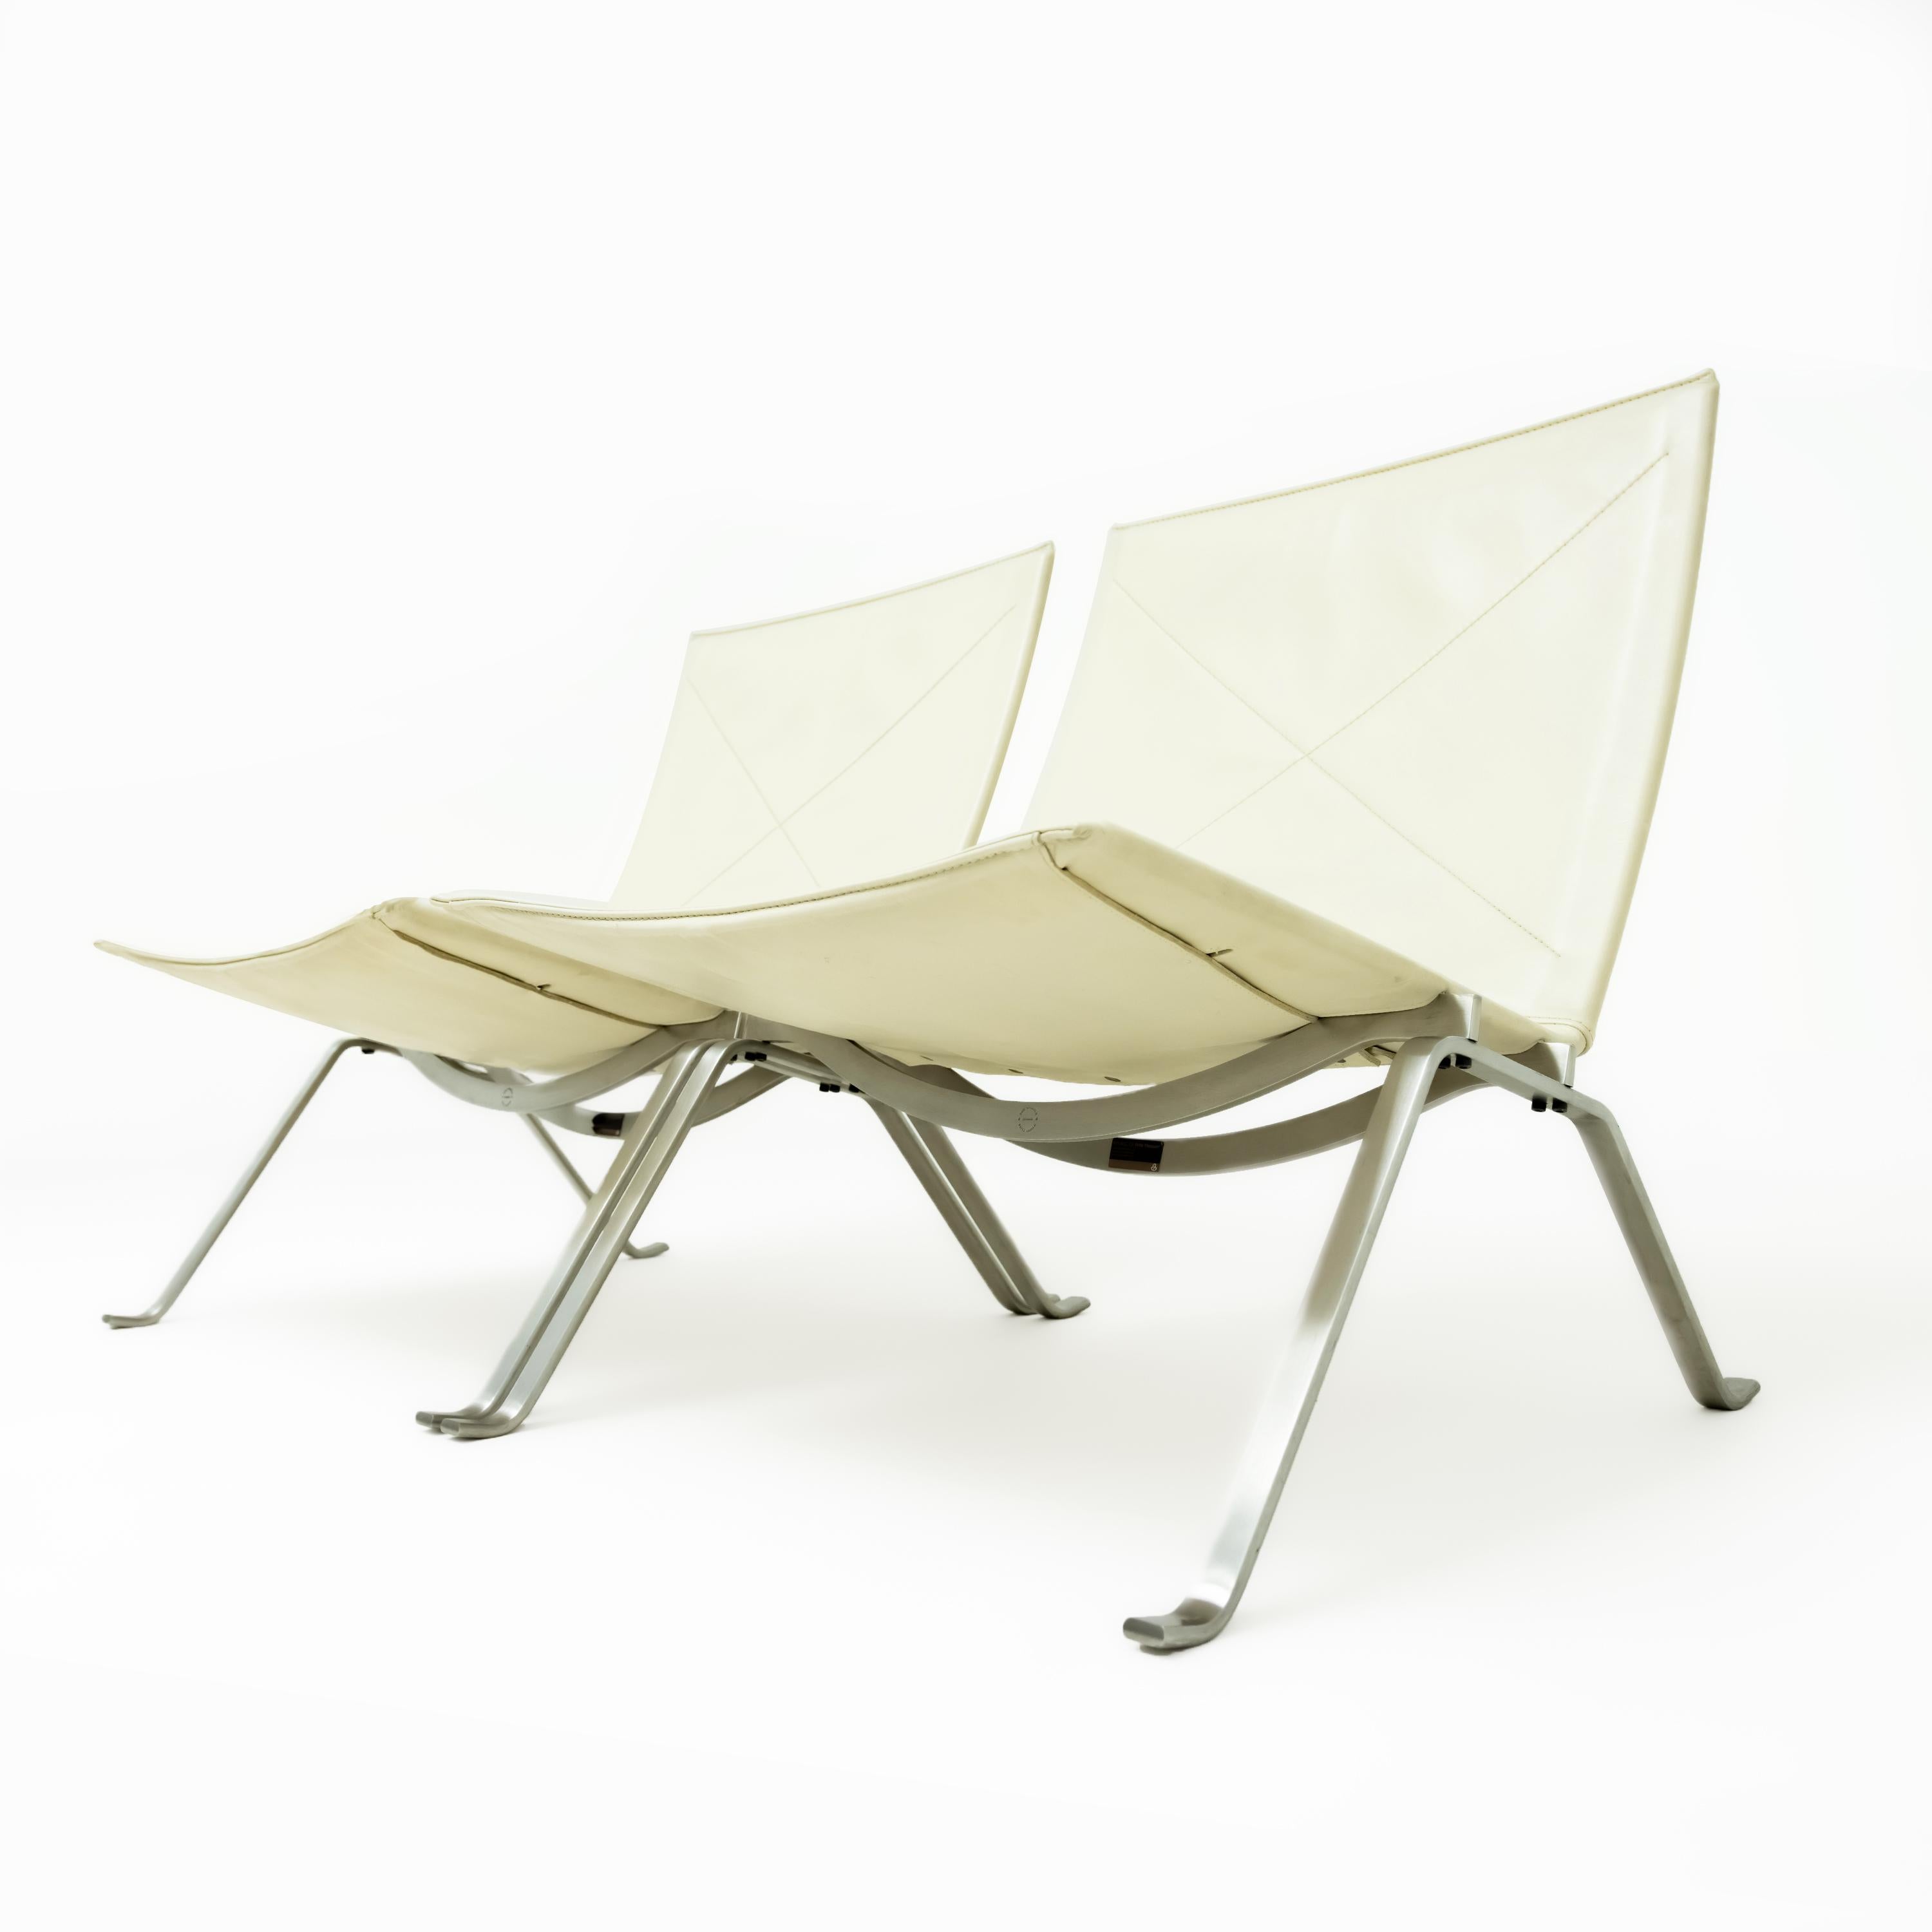 Pair of Poul Kjaerholm PK22 Lounge Chairs in Cream Leather for Fritz Hansen In Good Condition In Highclere, Newbury